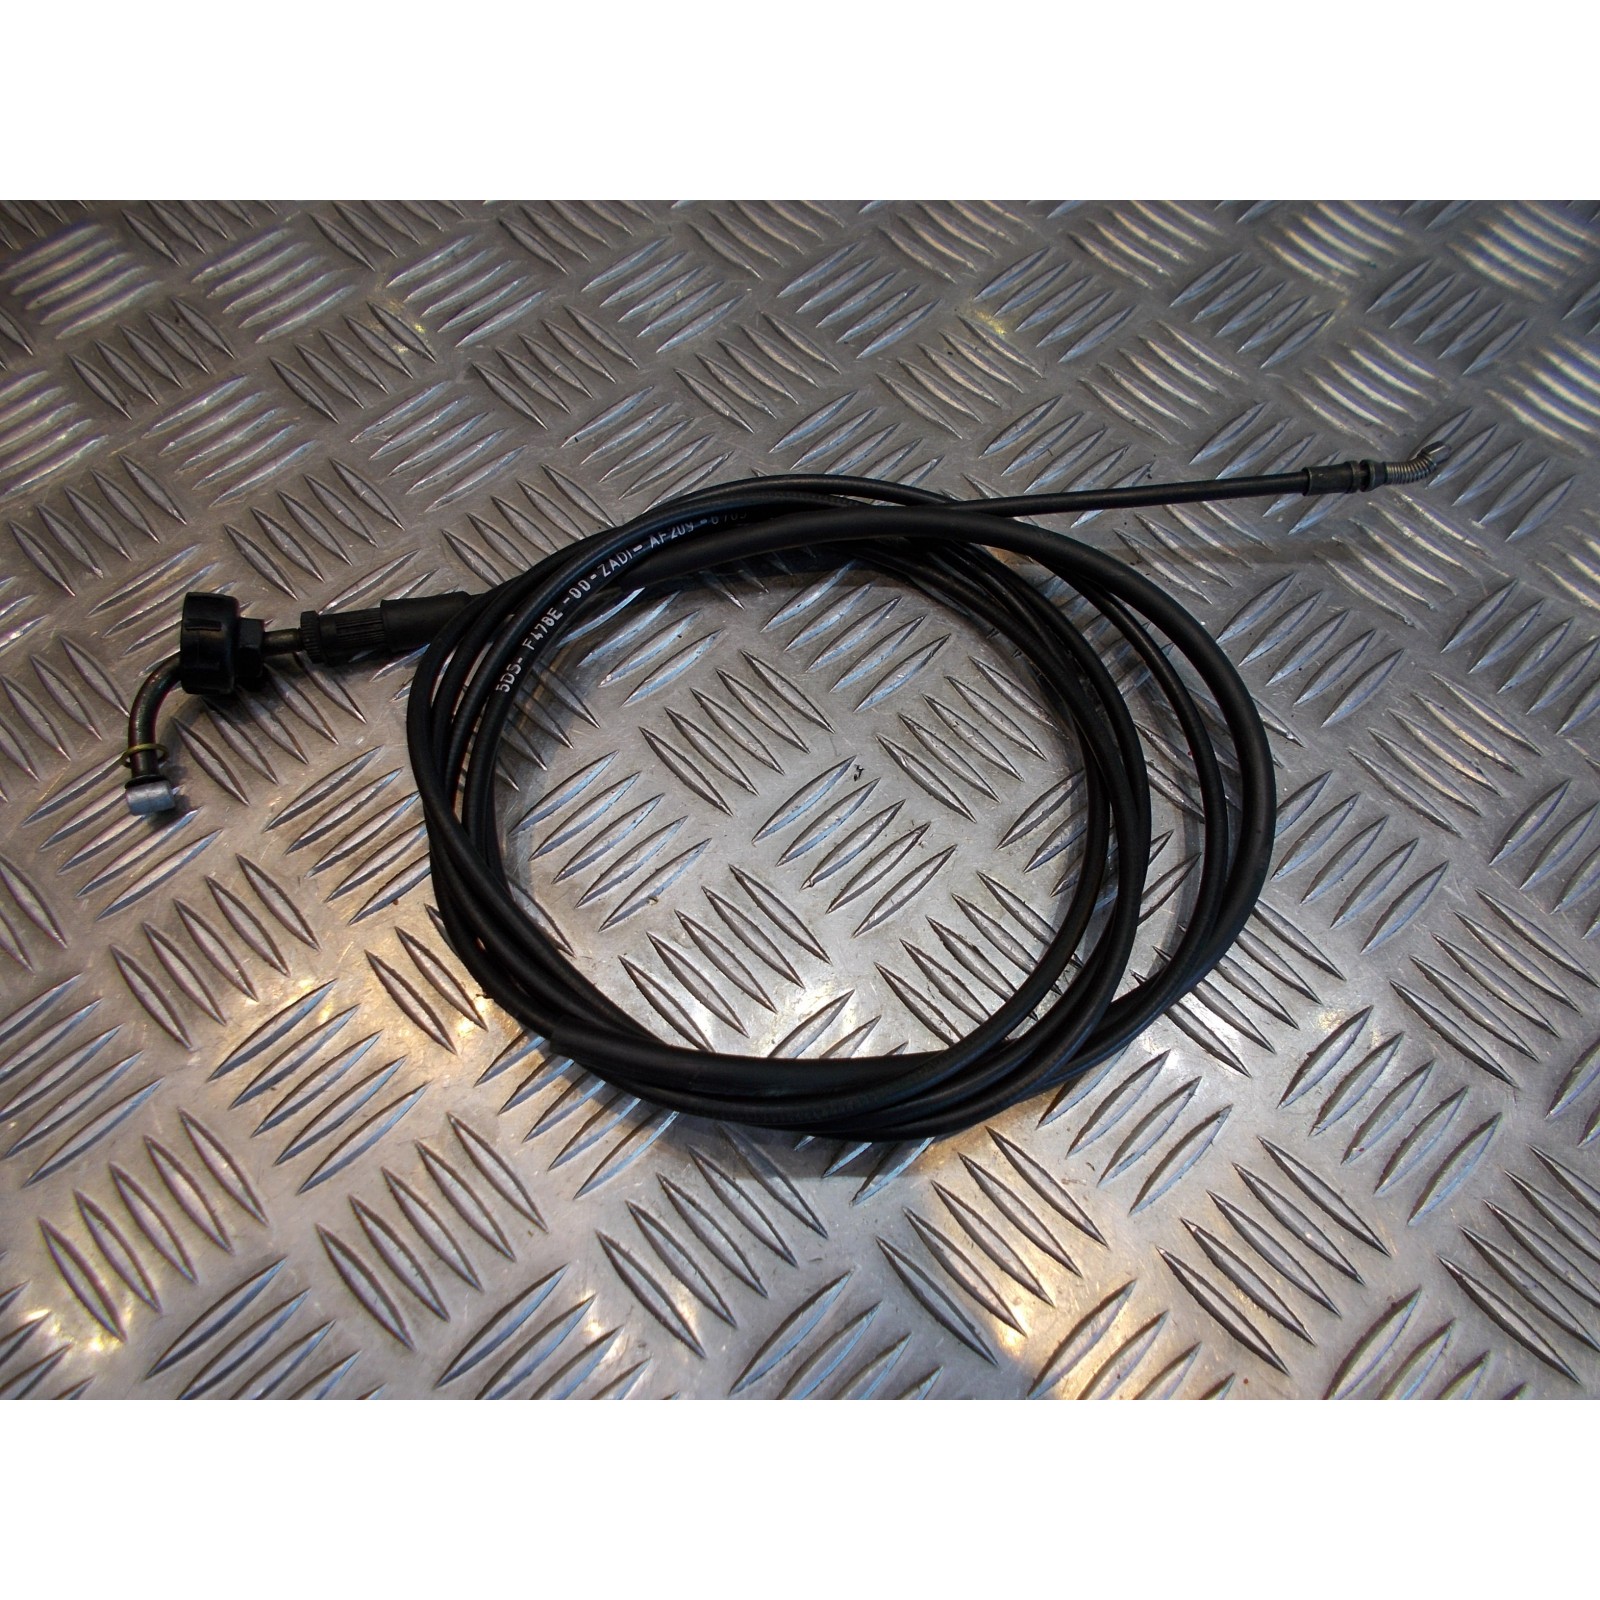 cable ouverture verrouillage selle scooter yamaha yp 125 majesty mbk skyliner